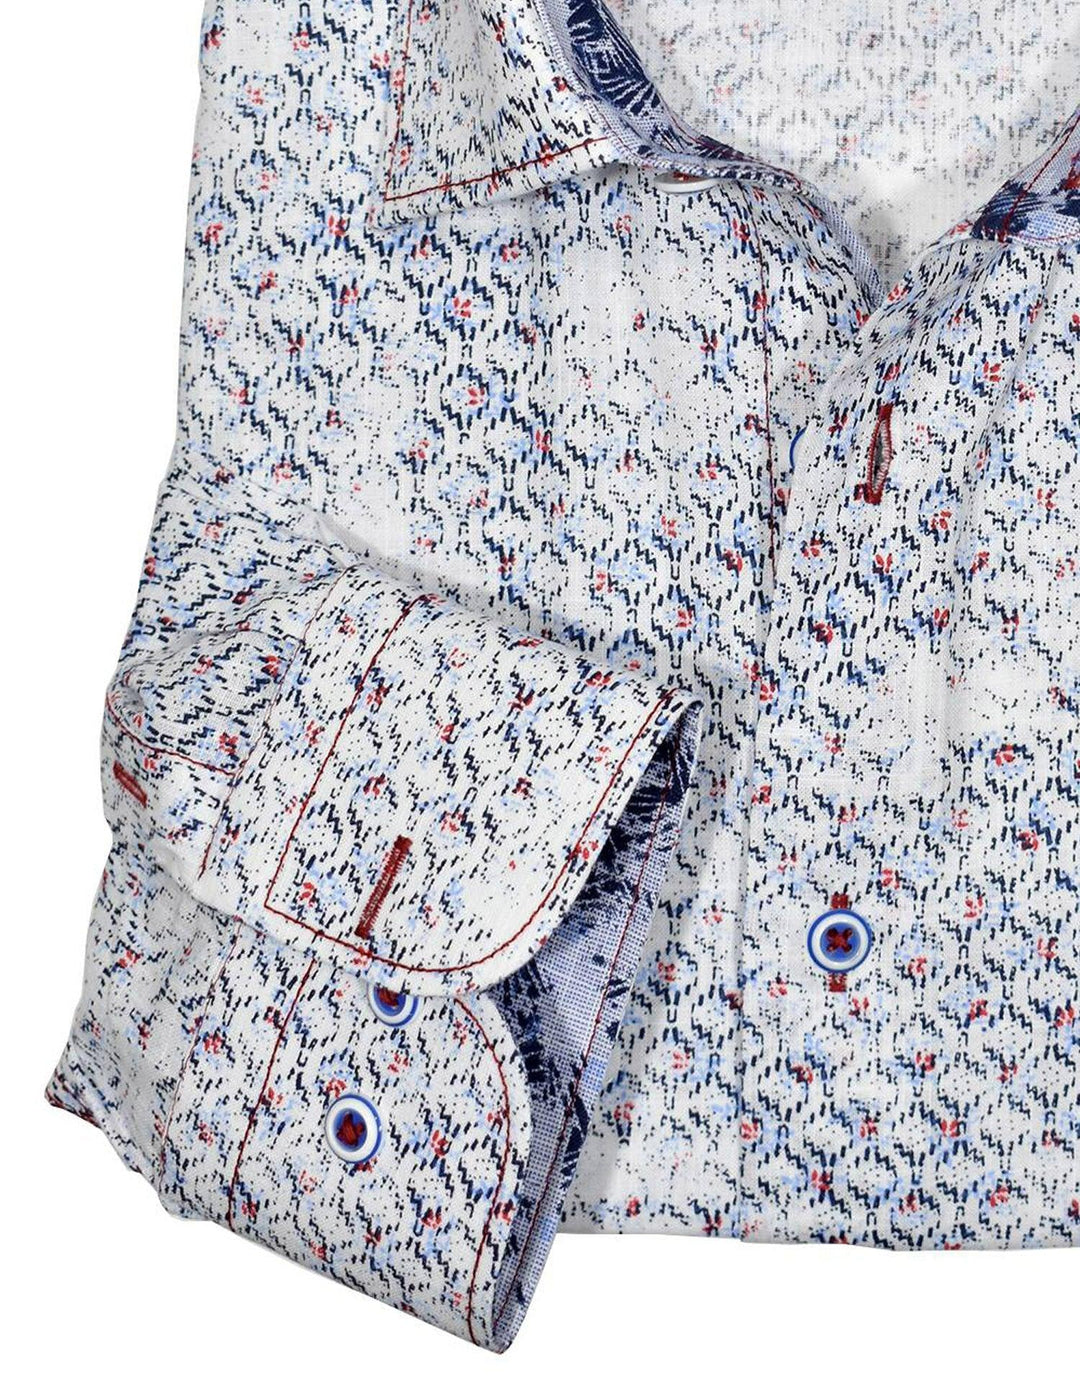 Exclusive soft cotton fabric. Unique, colorful fractured print. Excellent sport shirt with jeans. Classic trim fabric. Cool red stitching. Custom selected buttons. 2 button signature cuffs. Classic shaped fit.  Shirt by Marcello Sport.